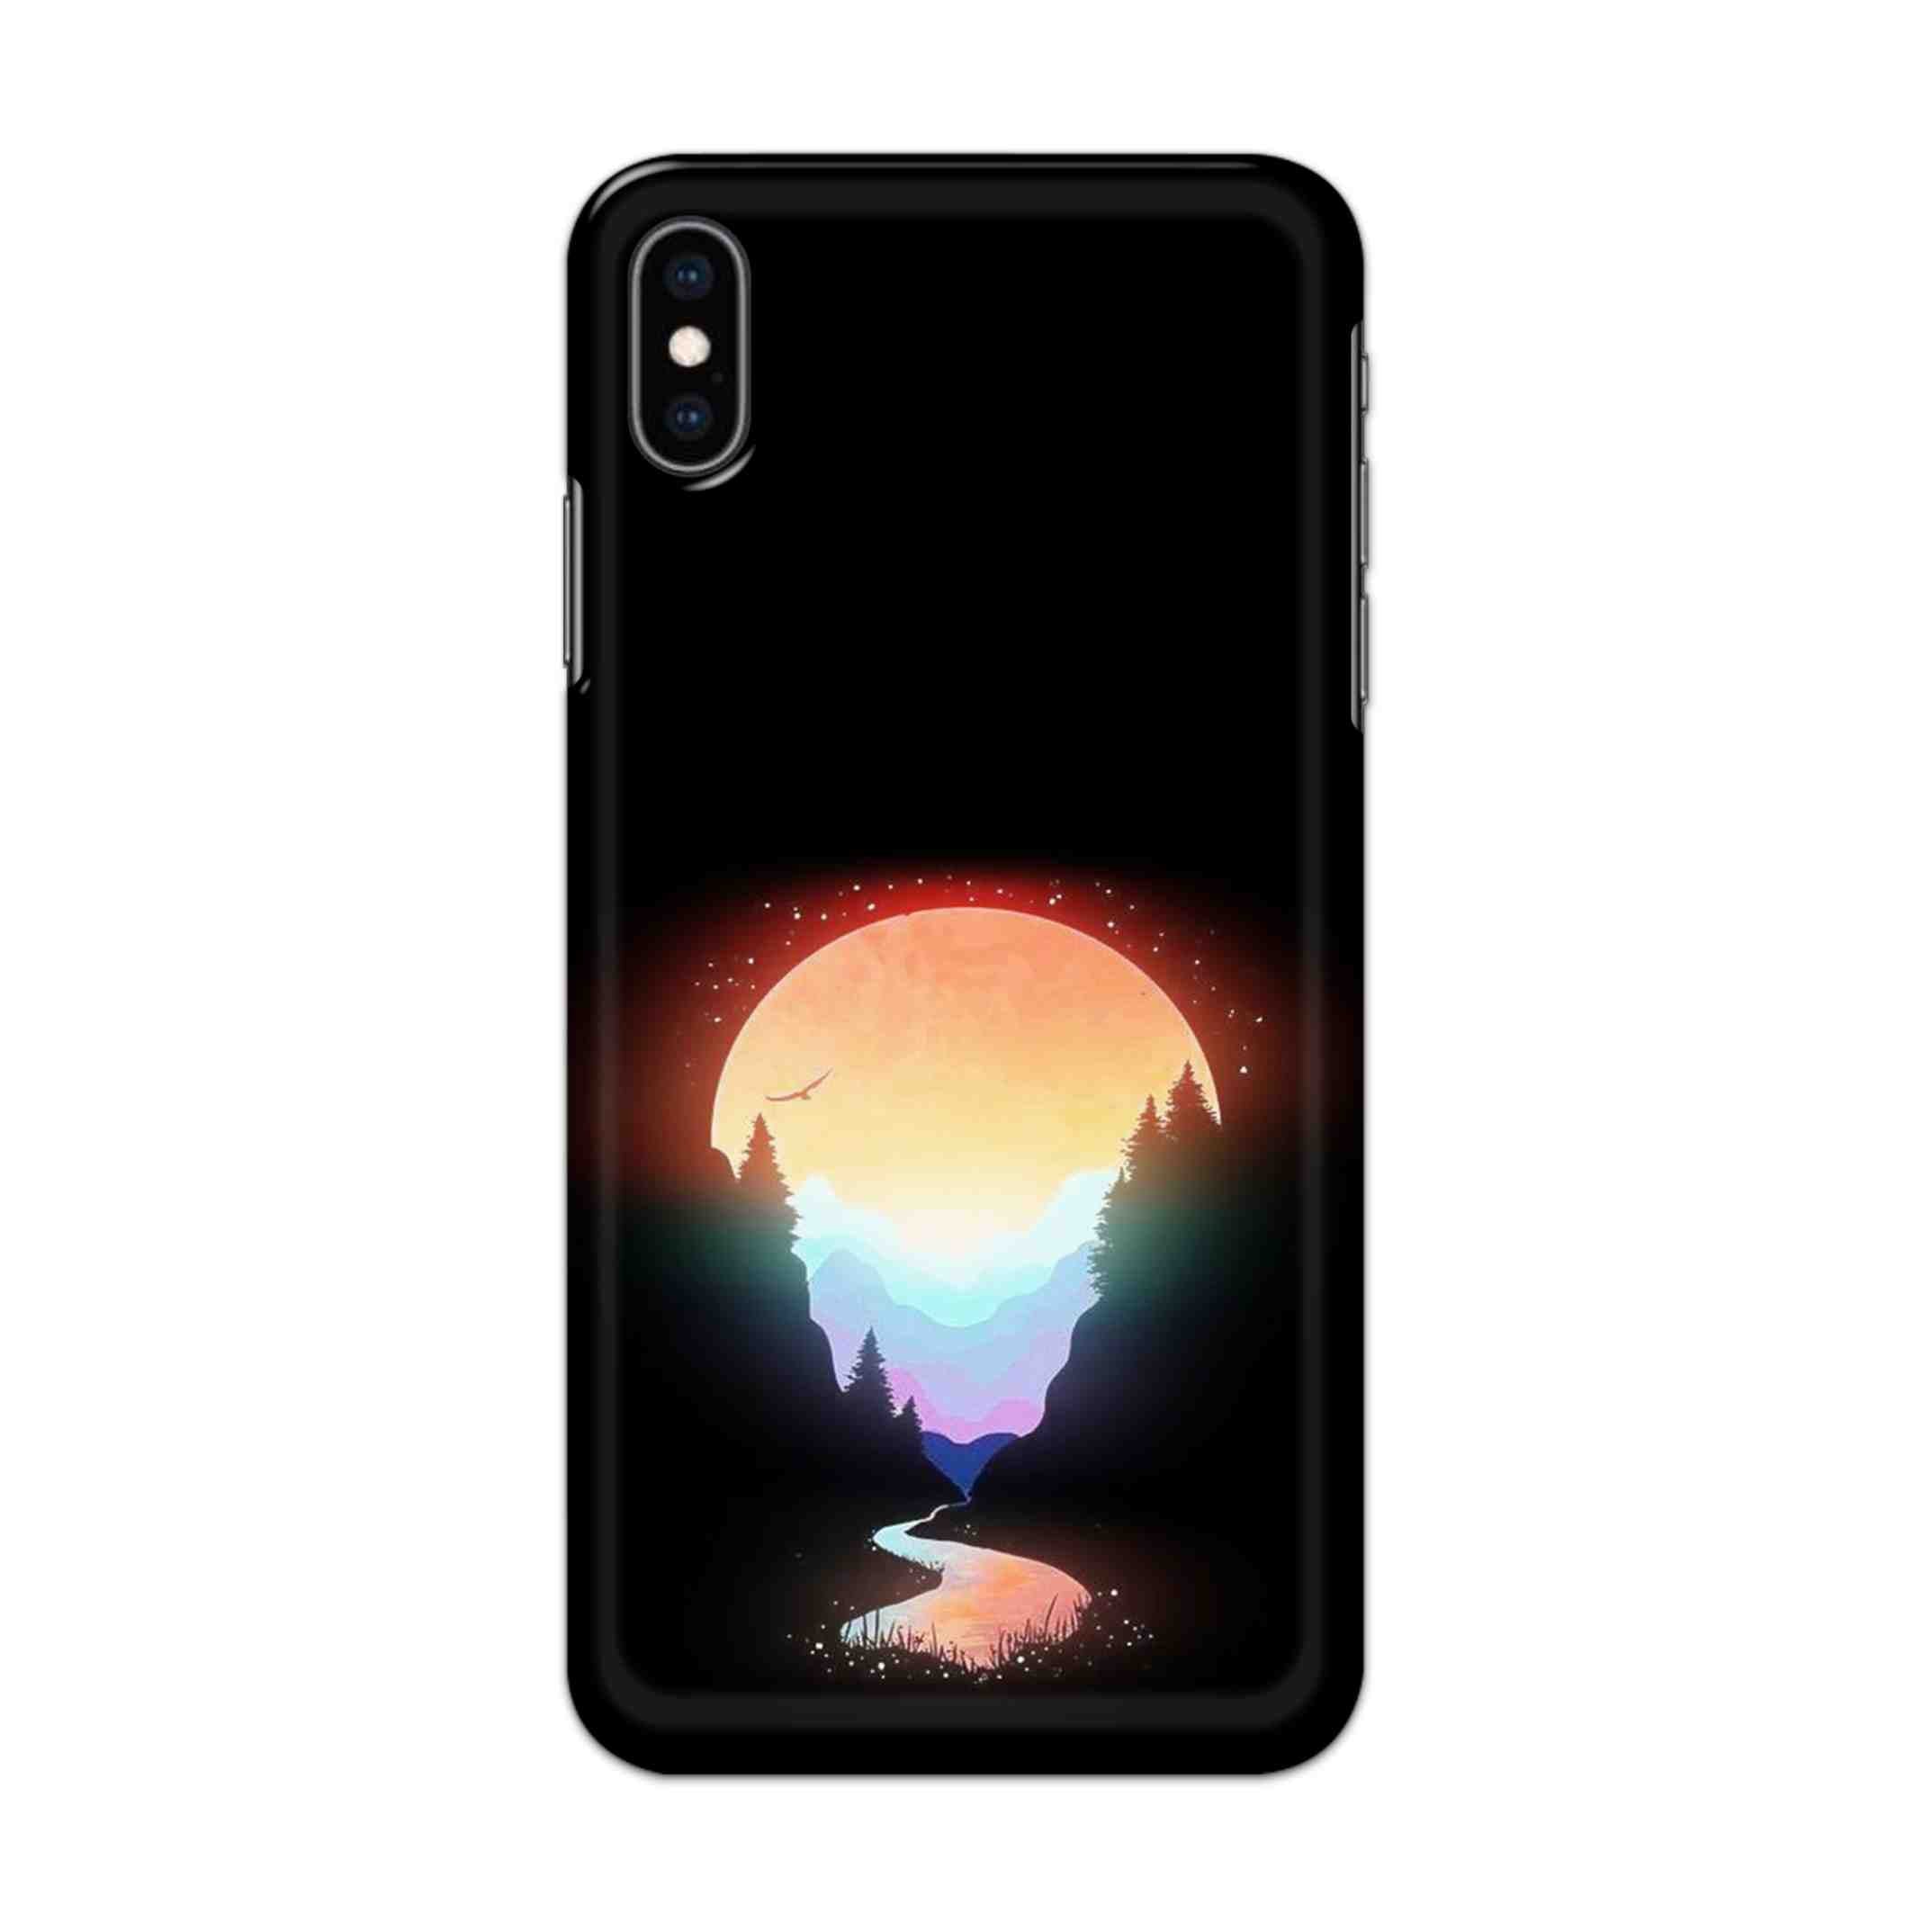 Buy Rainbow Hard Back Mobile Phone Case/Cover For iPhone XS MAX Online